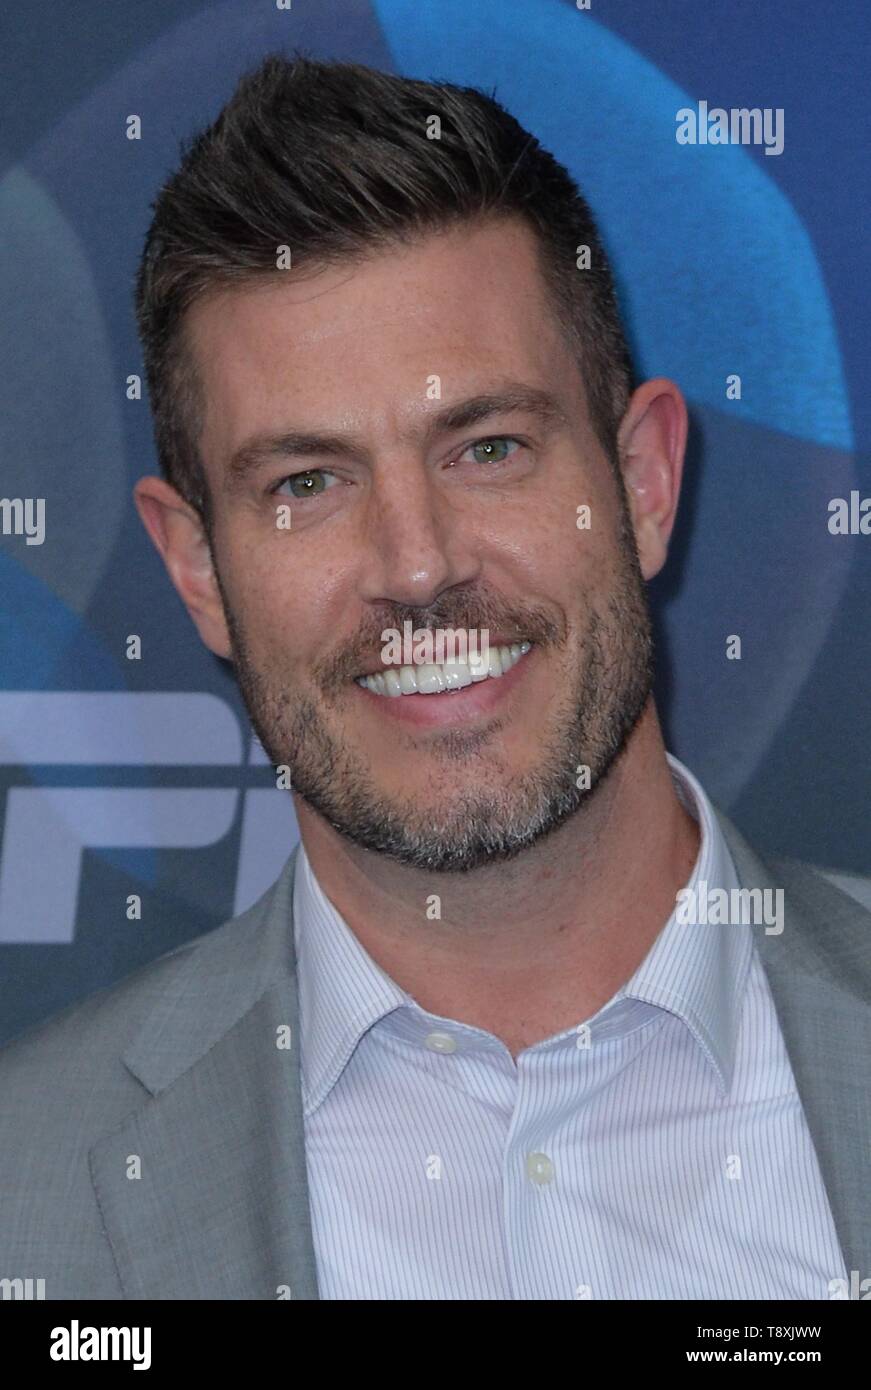 New York, NY, USA. 14th May, 2019. Jesse Palmer at arrivals for ABC Network Upfronts 2019, Tavern on the Green, Central Park West, New York, NY May 14, 2019. Credit: Kristin Callahan/Everett Collection/Alamy Live News Stock Photo